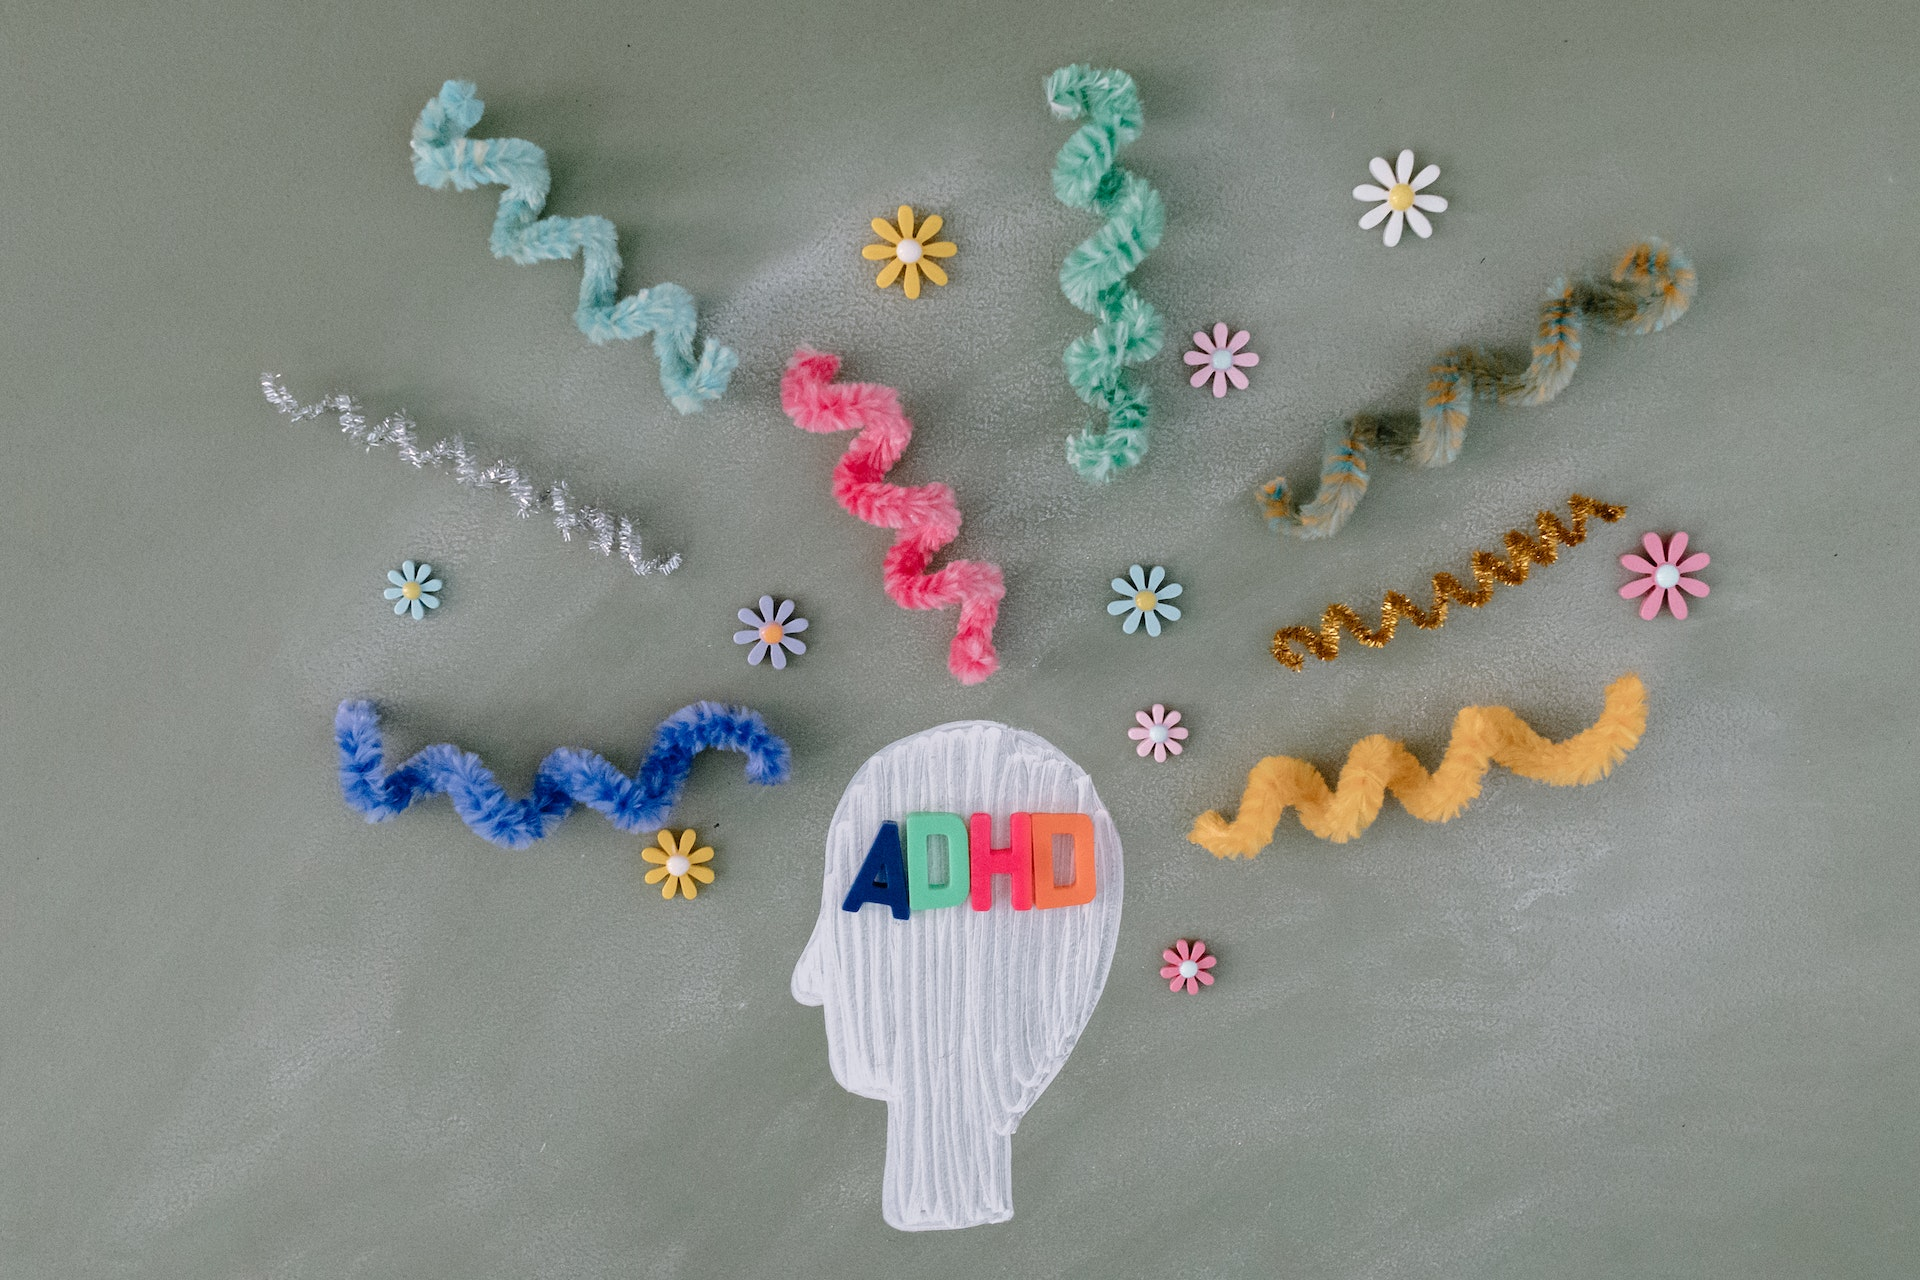 An outline of a person's head with "ADHD" written in the center surrounded by colorful squiggles